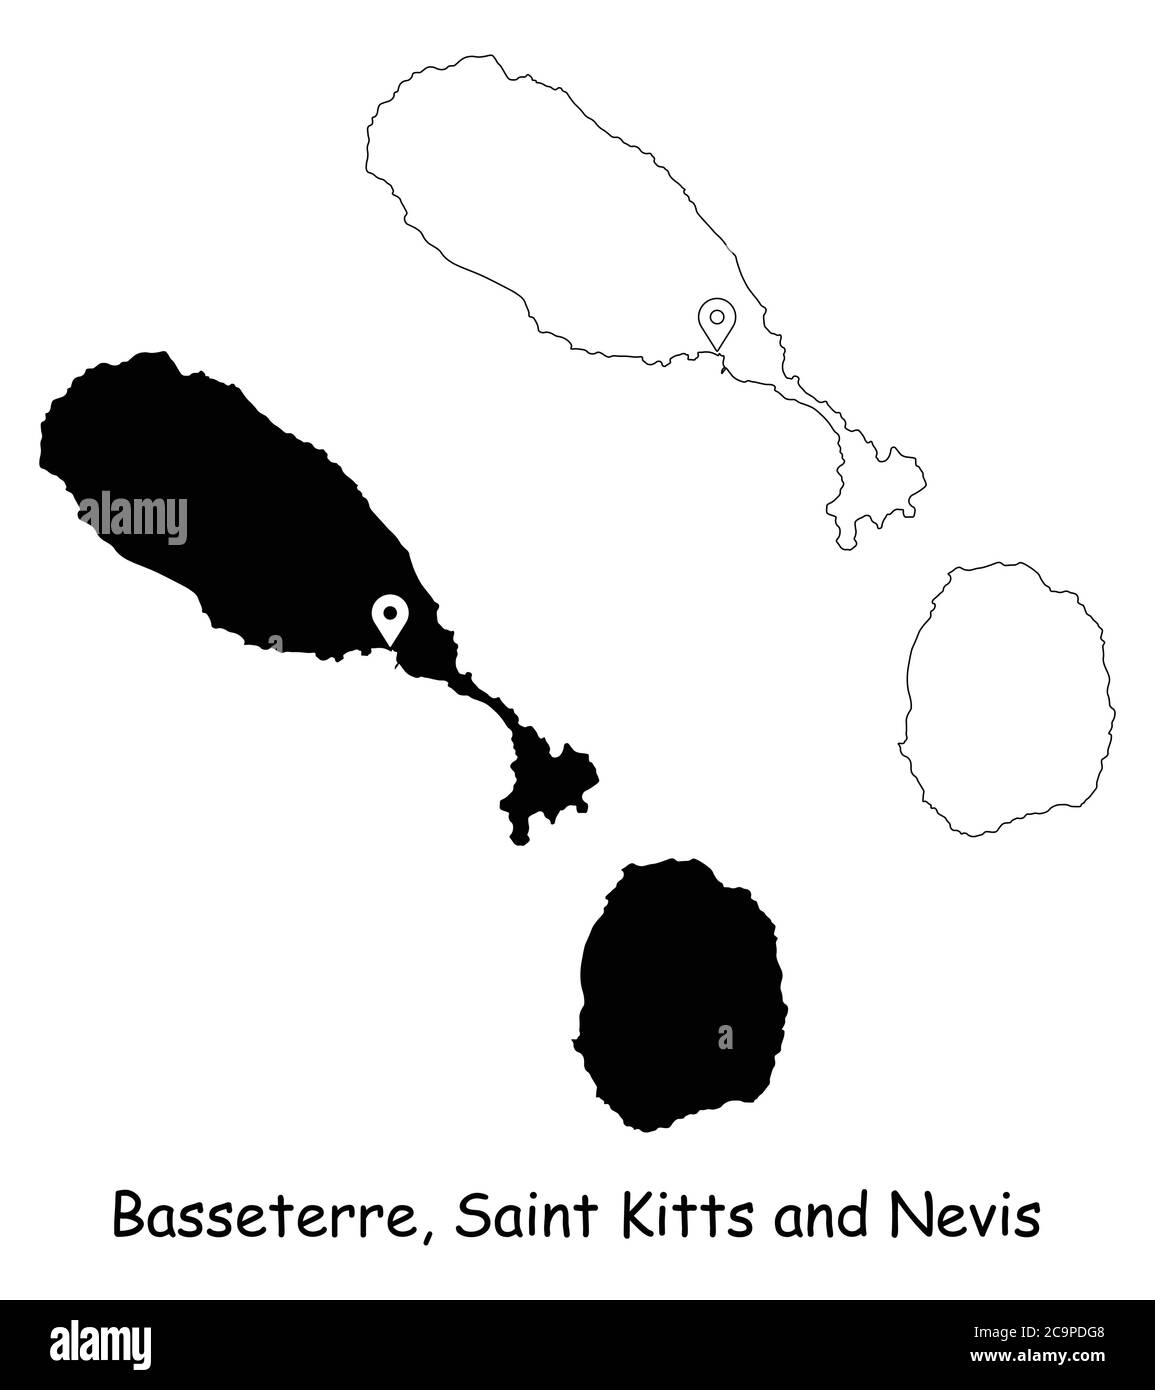 Basseterre, St. Kitts & Nevis. Detailed Country Map with Location Pin on Capital City. Black silhouette and outline maps isolated on white background. Stock Vector